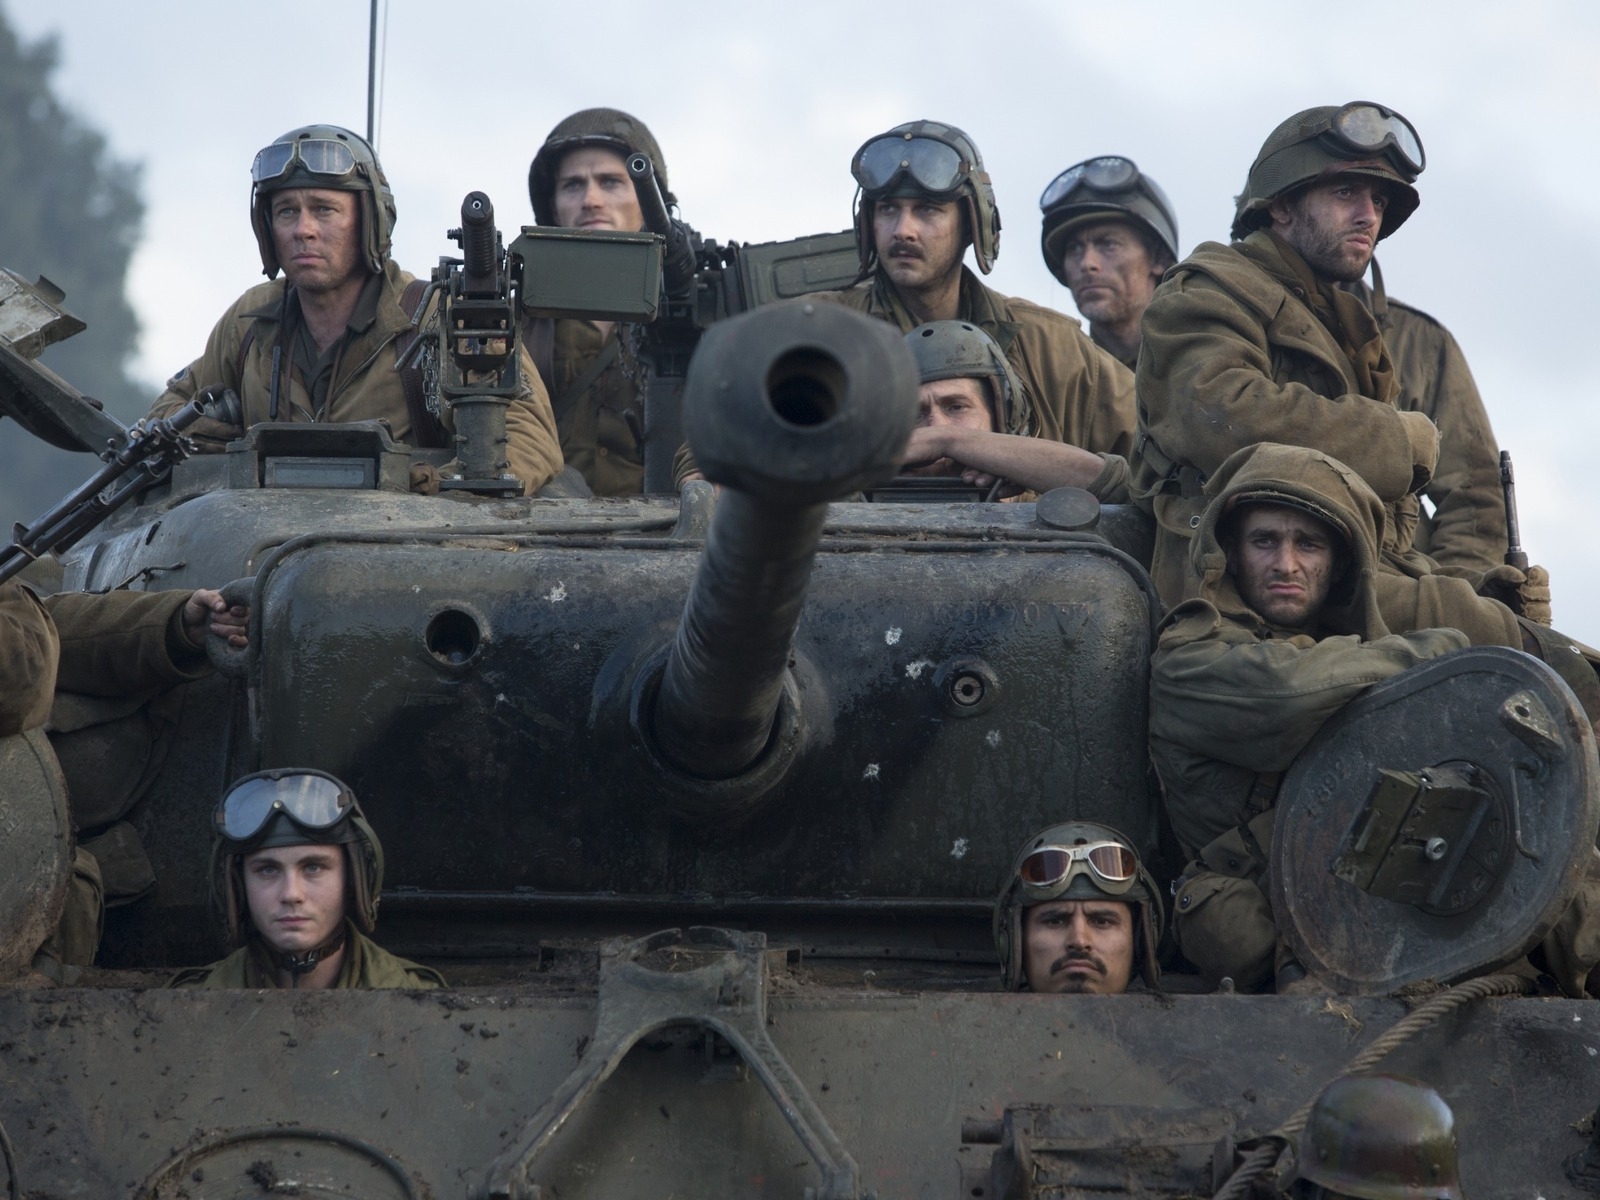 Fury Movie 2014 for 1600 x 1200 resolution